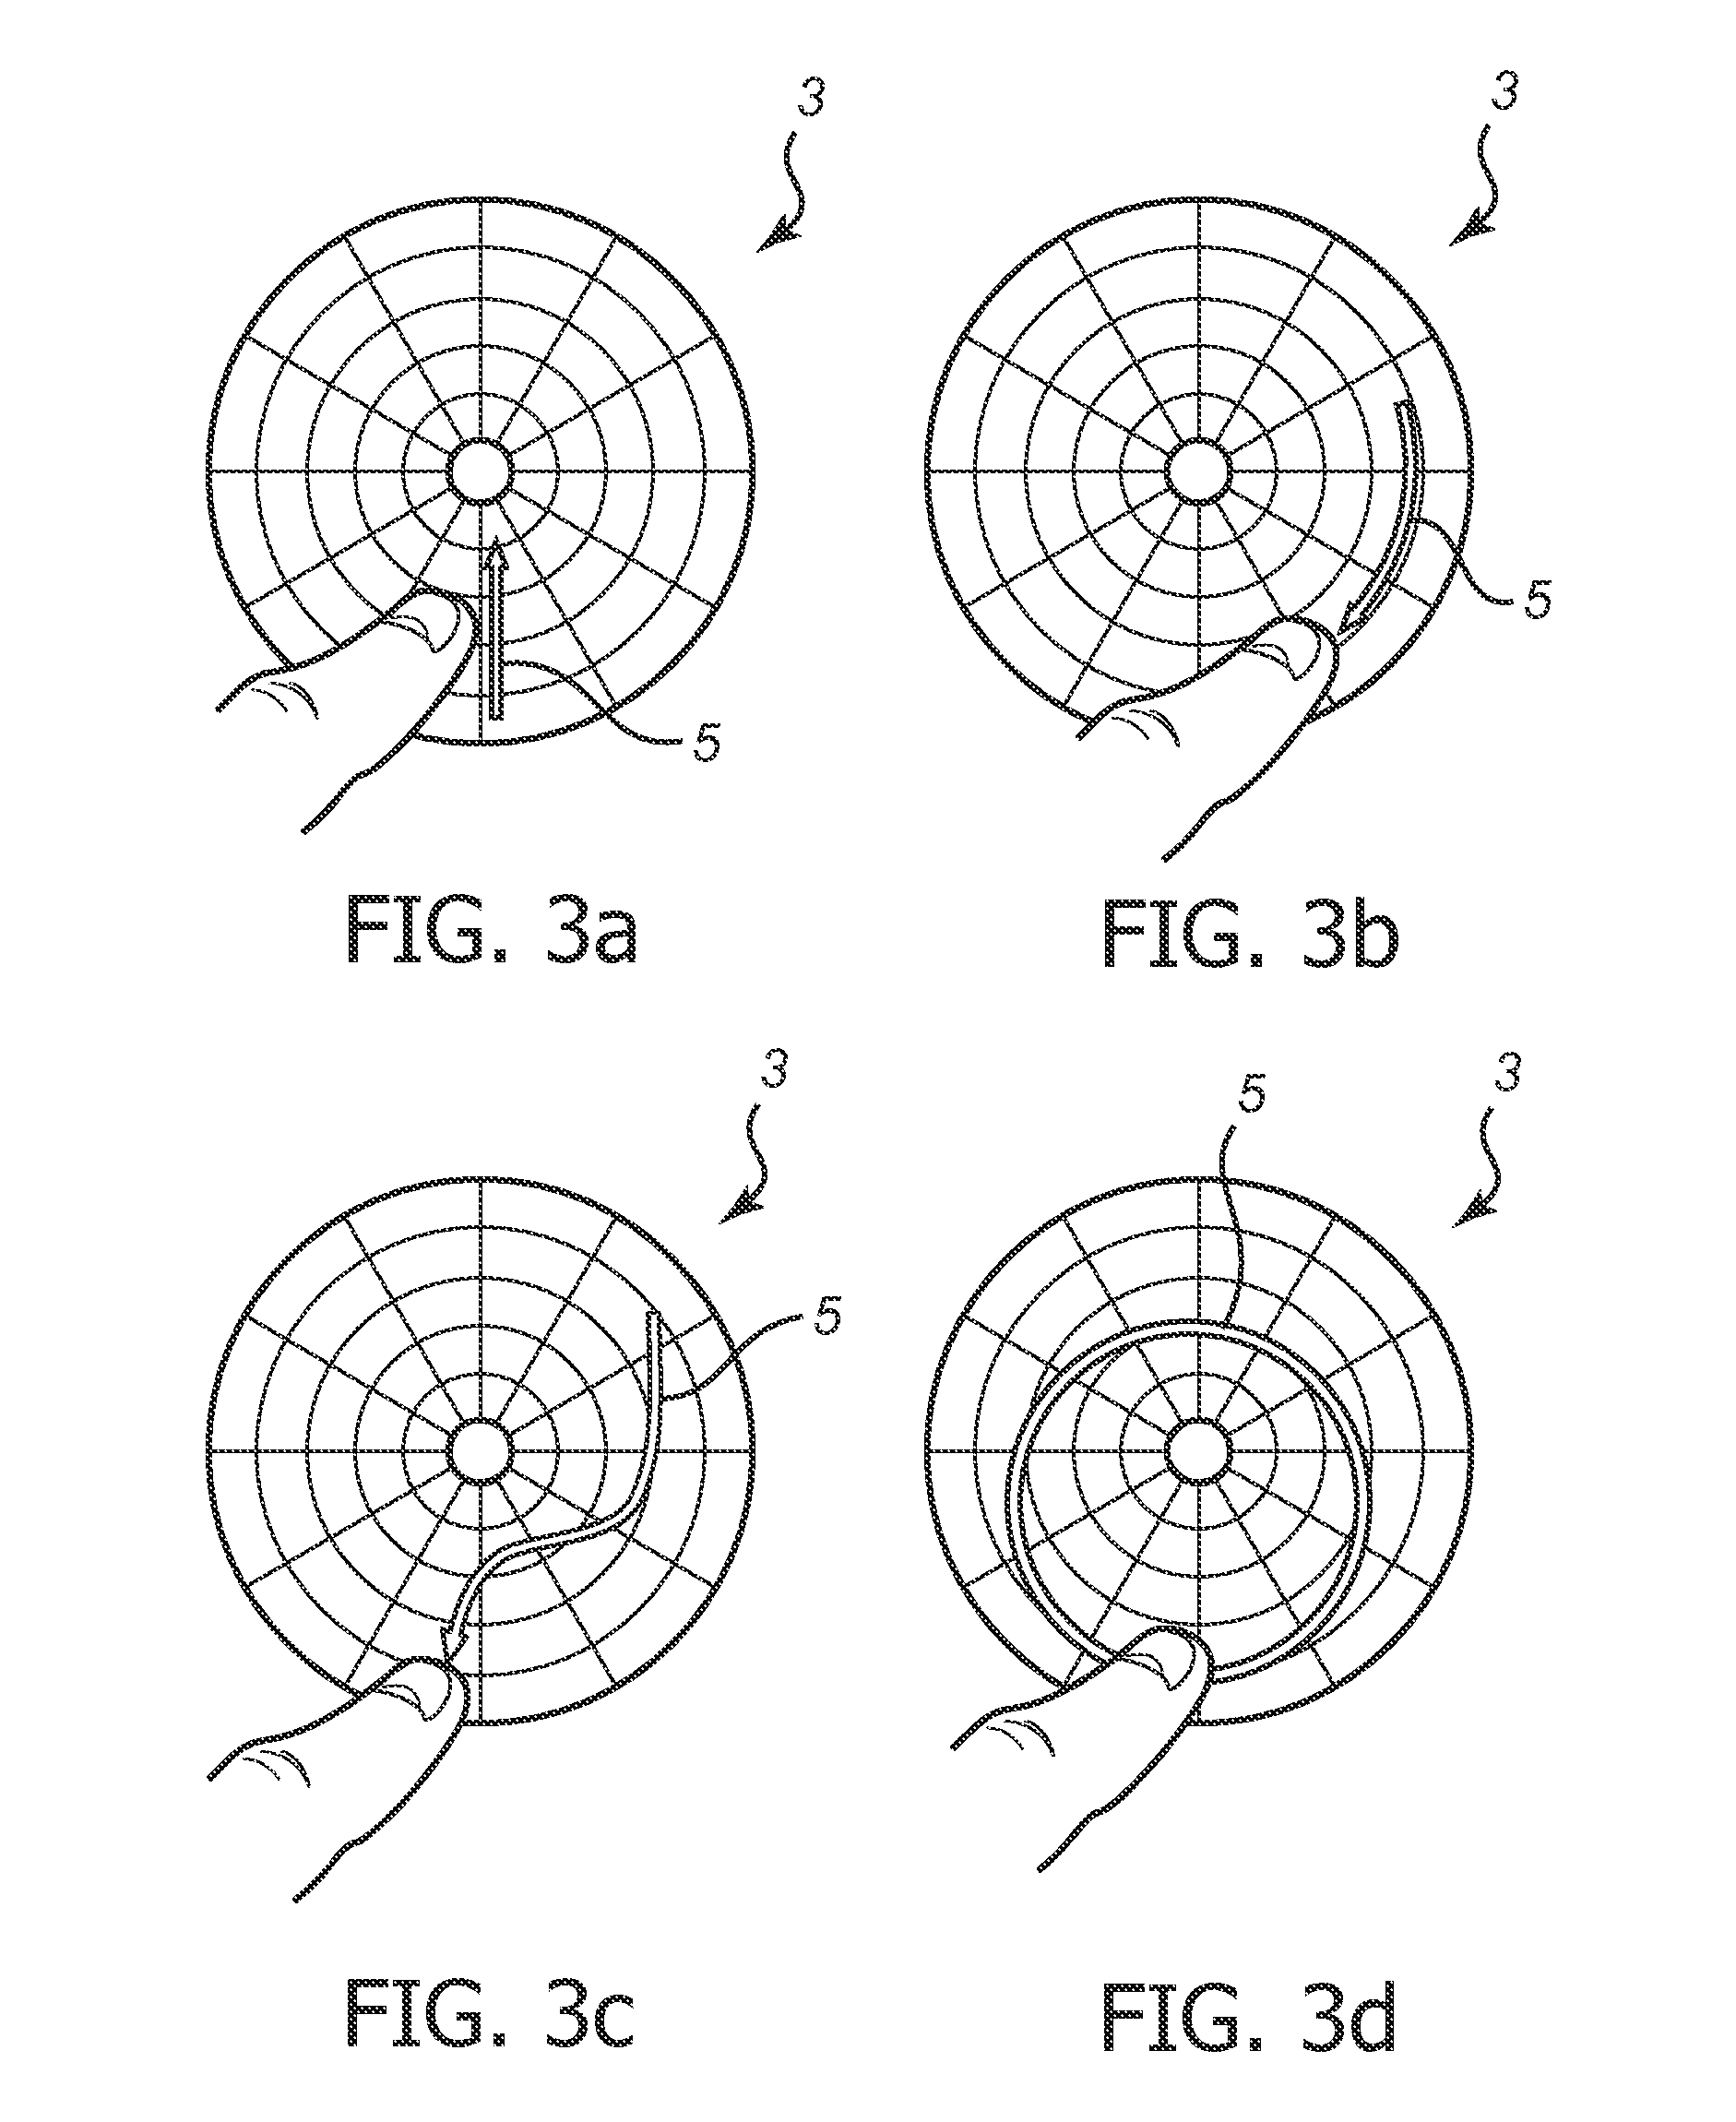 Controlling a color variation of a color adjustable illumination device